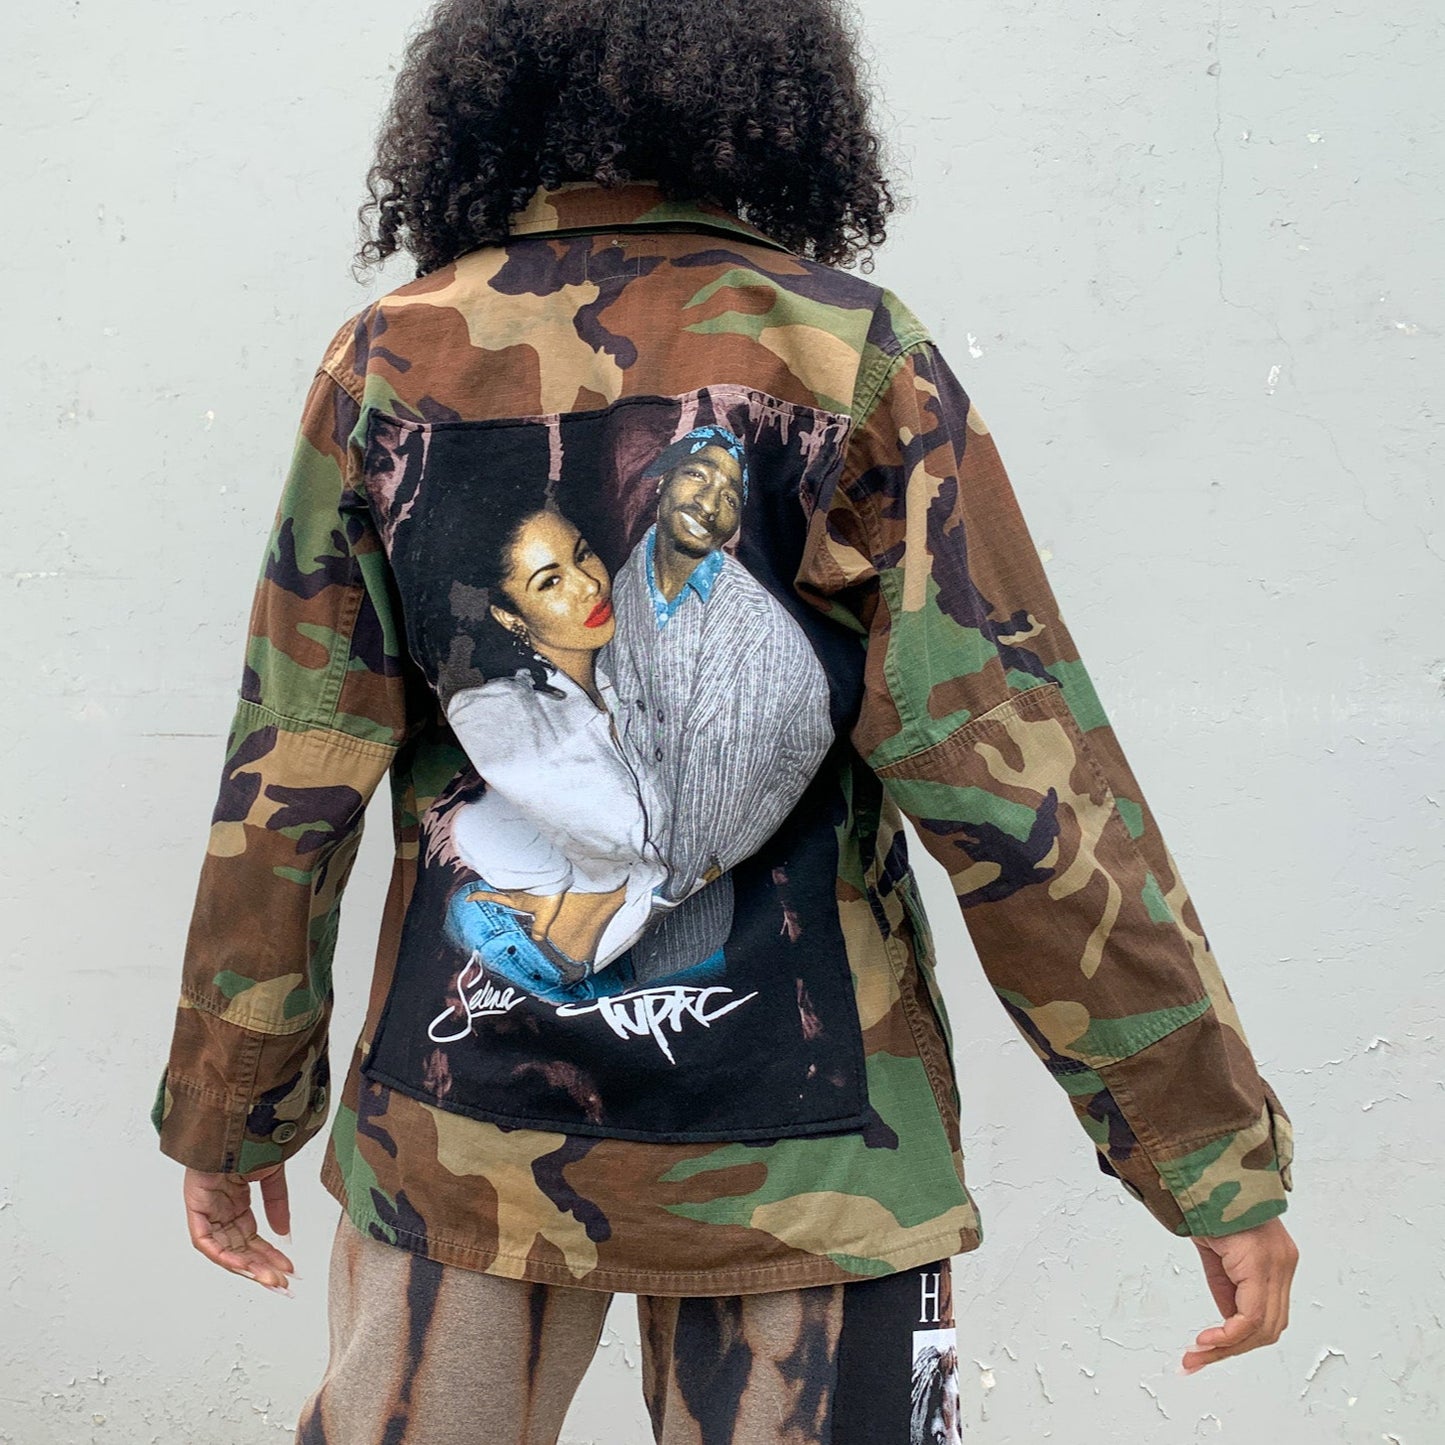 90s Inspired Camo Patch Jacket